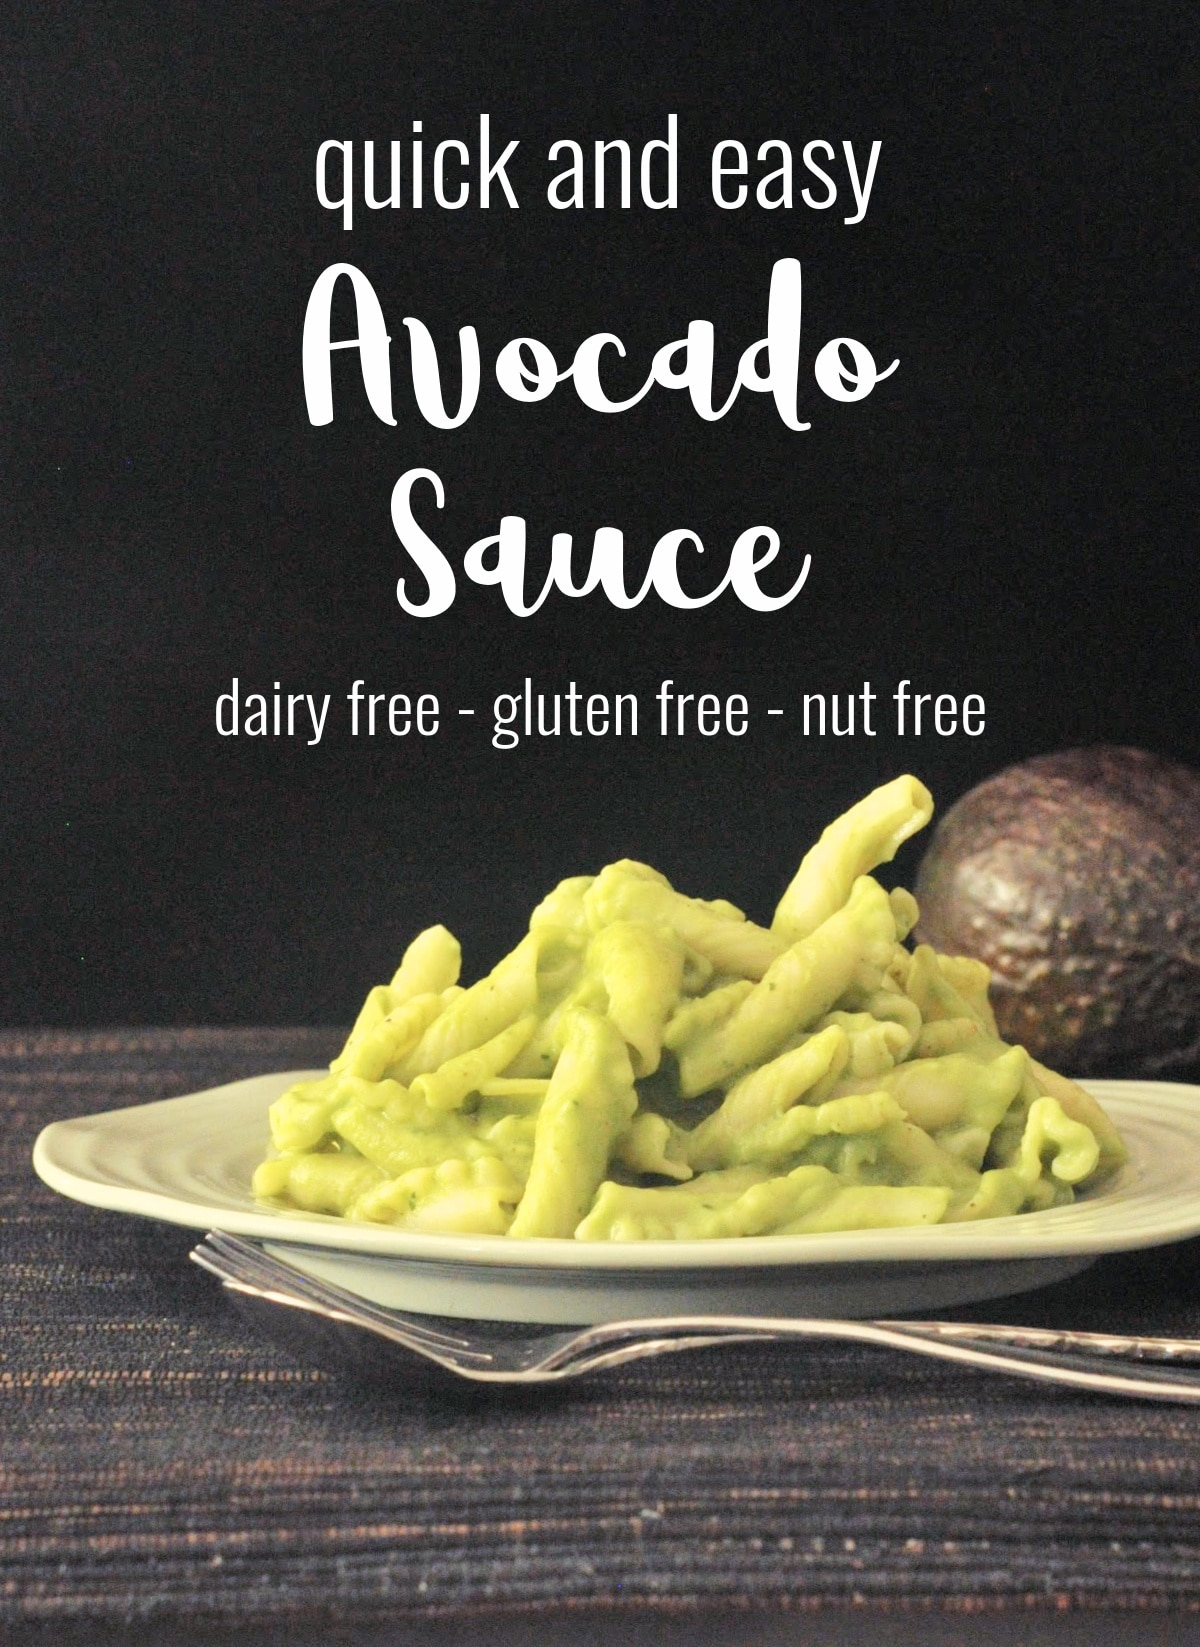 a plate of light green avocado sauce pasta against a black background. "quick and easy avocado sauce" text overlay